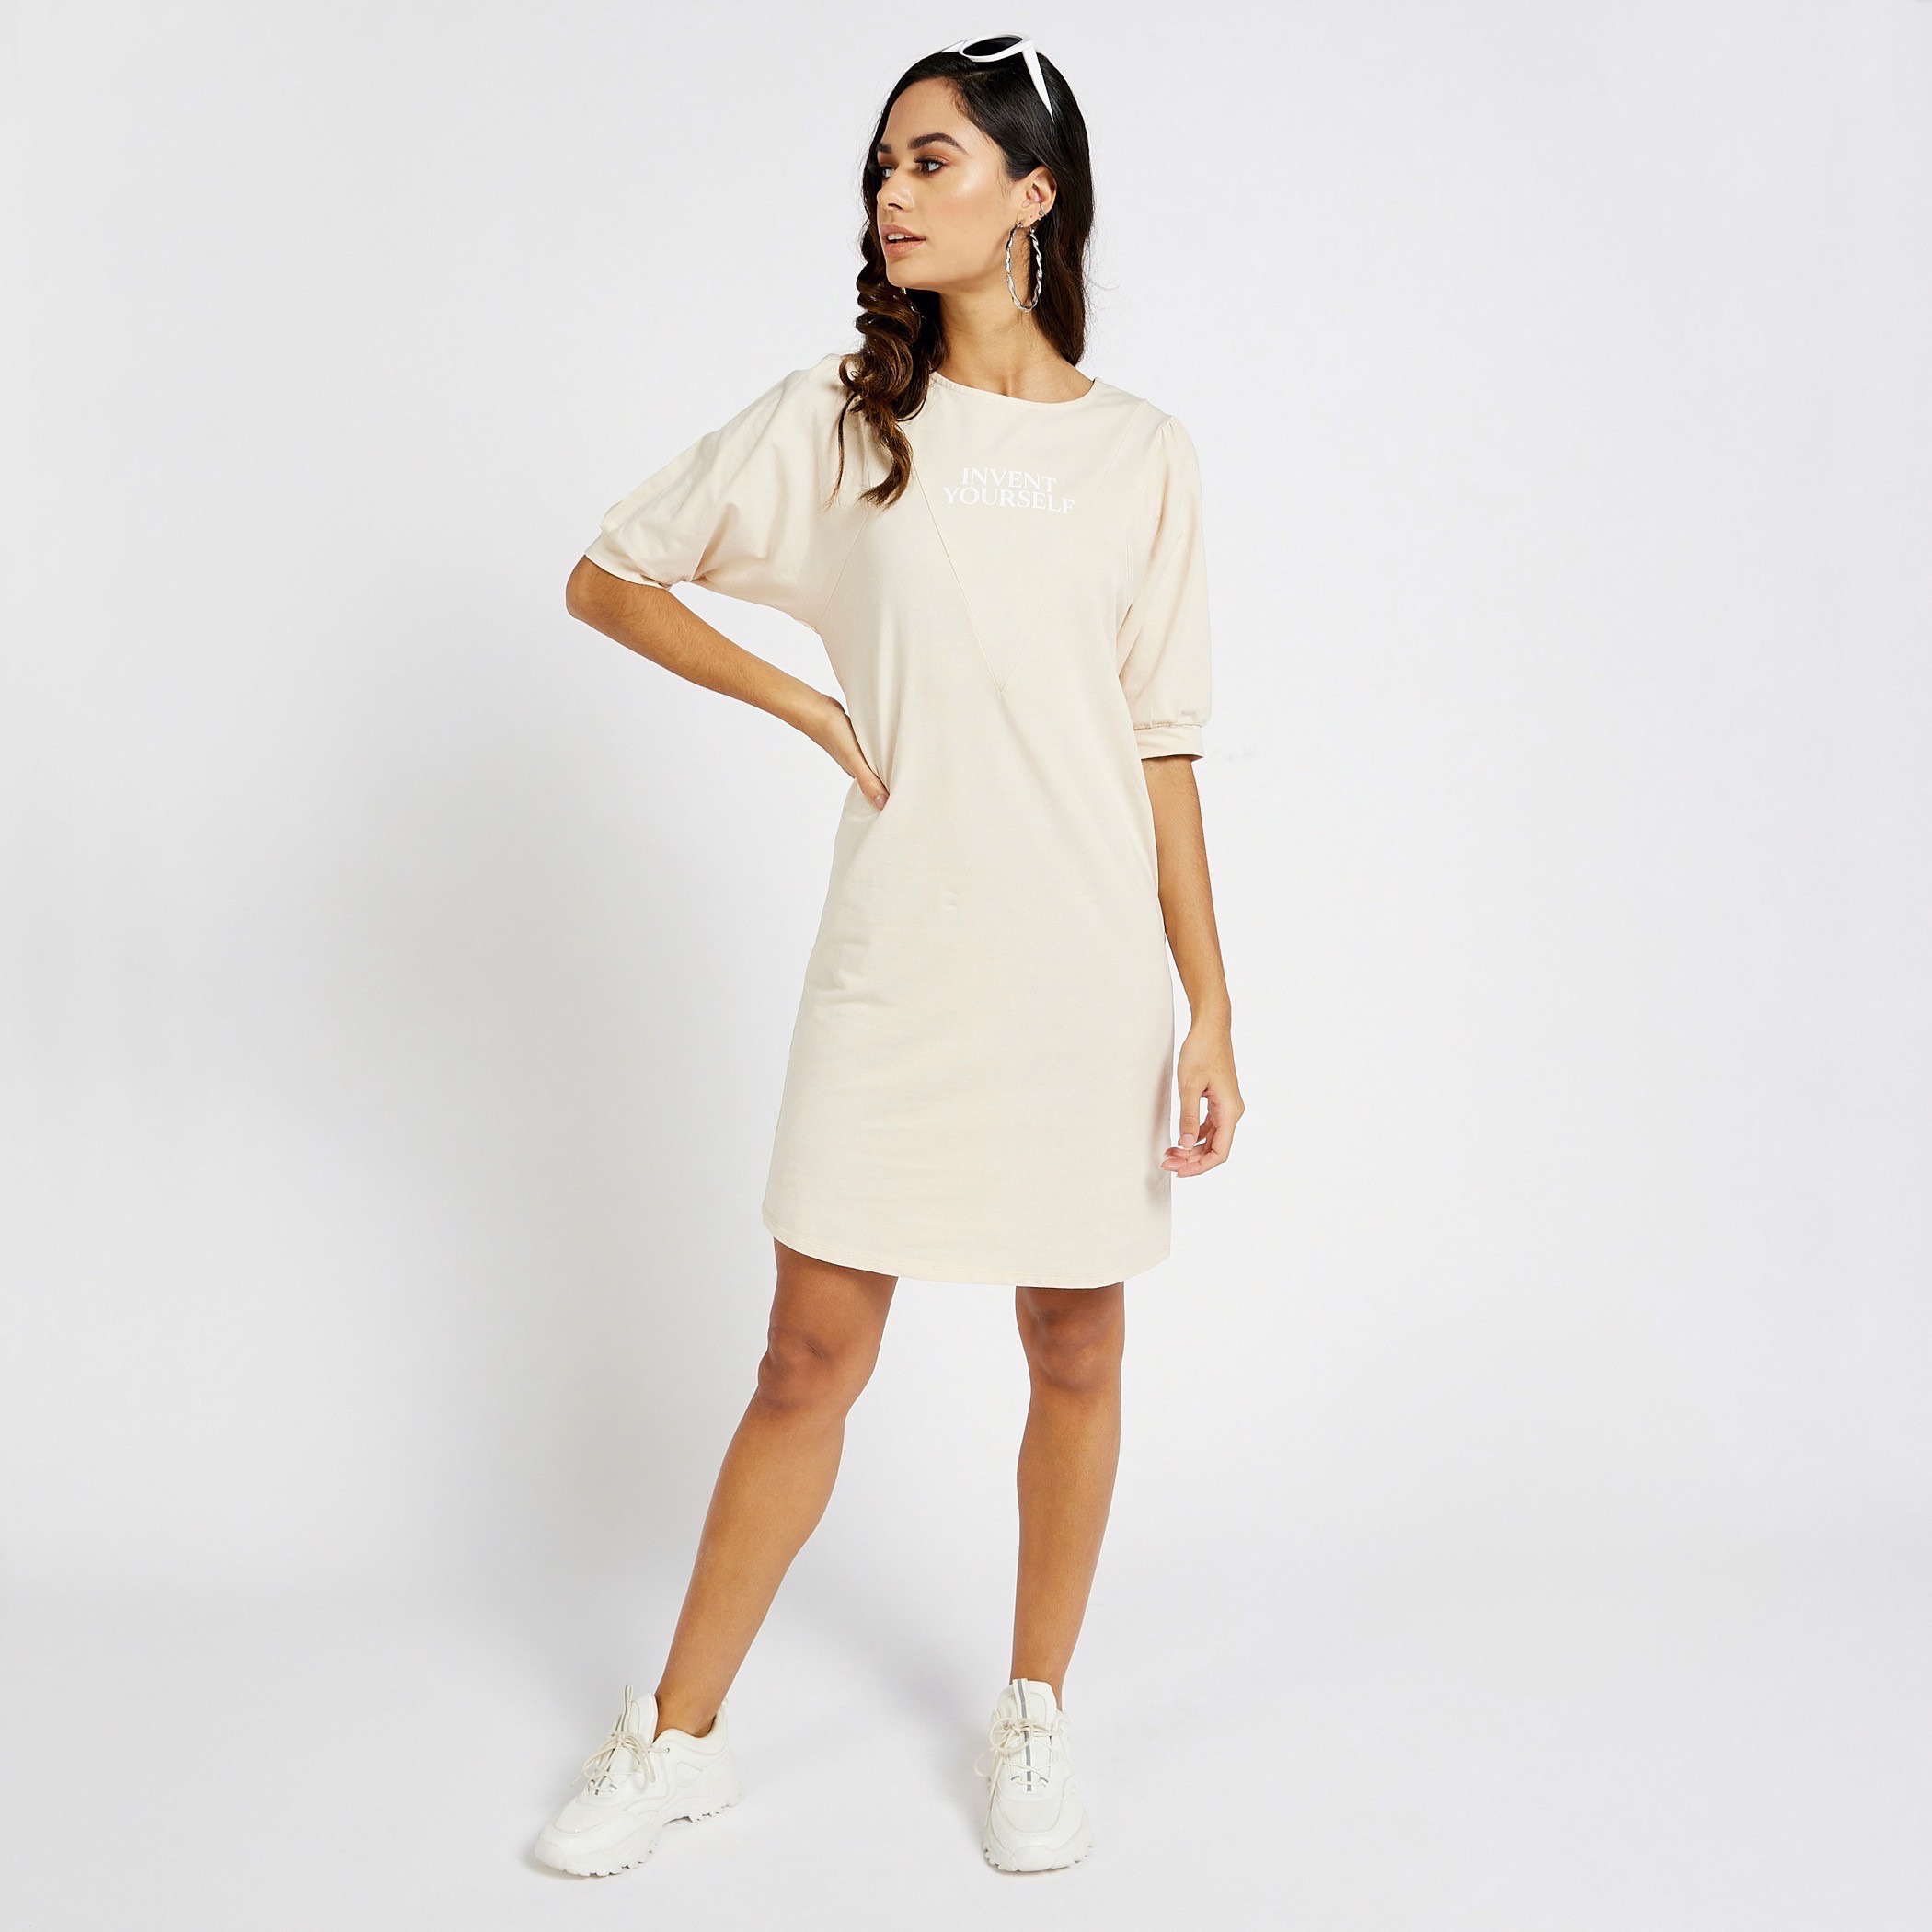 T-Shirt Dresses Are A Summer Essential - Here's How to Style Them - Fashion  Jackson